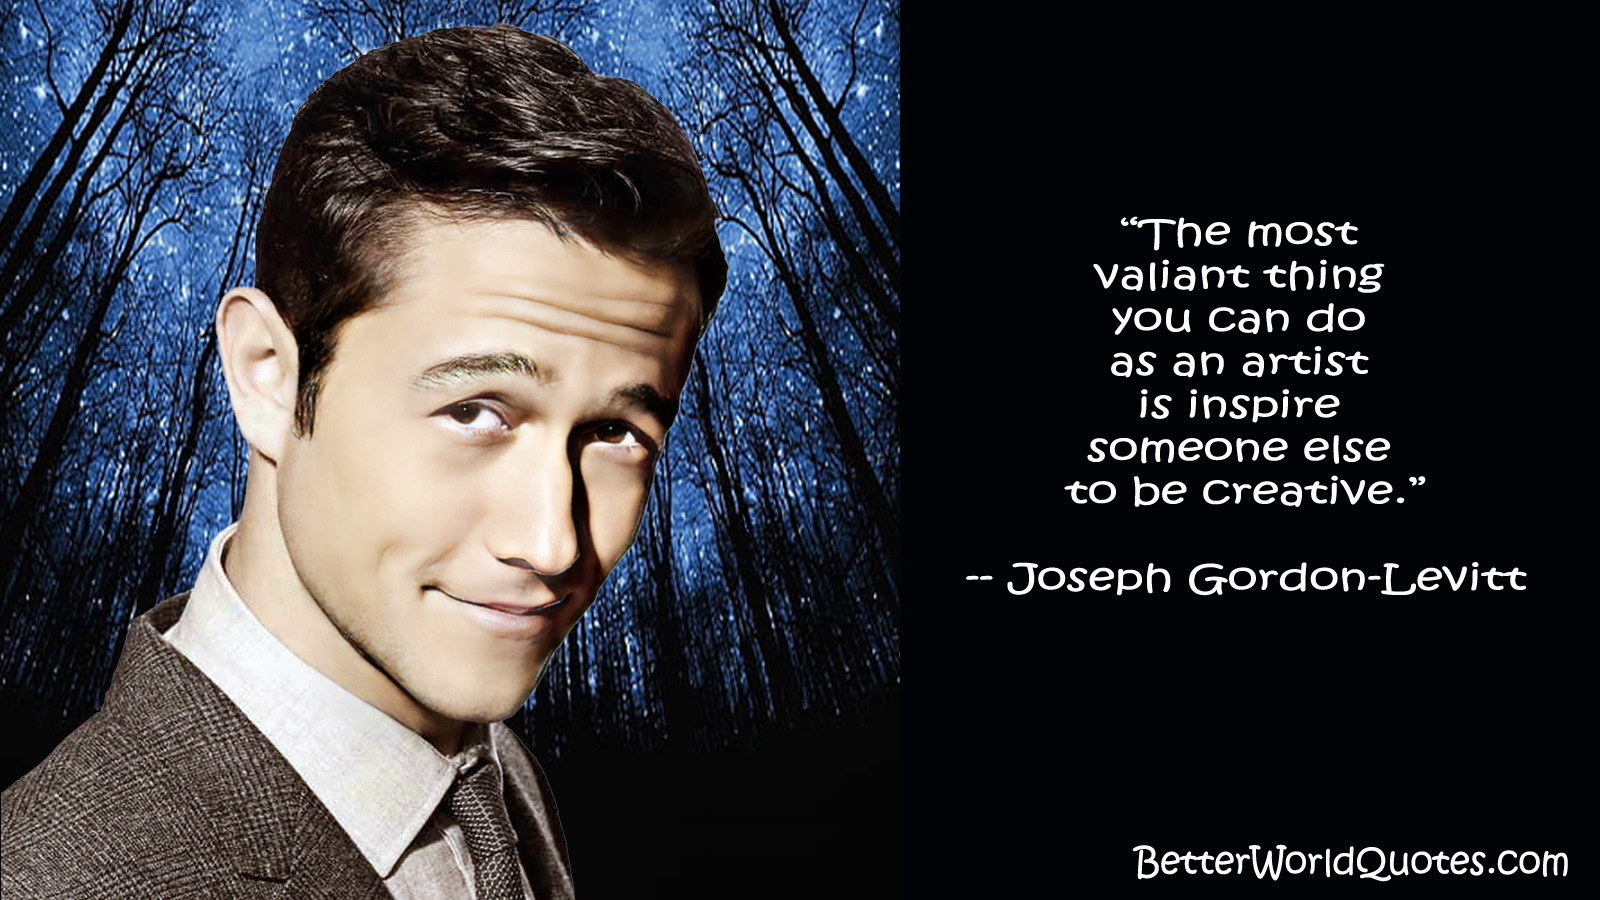 Joseph Gordon-Levitt: The most valiant thing you can do as an artist is inspire someone else to be creative.